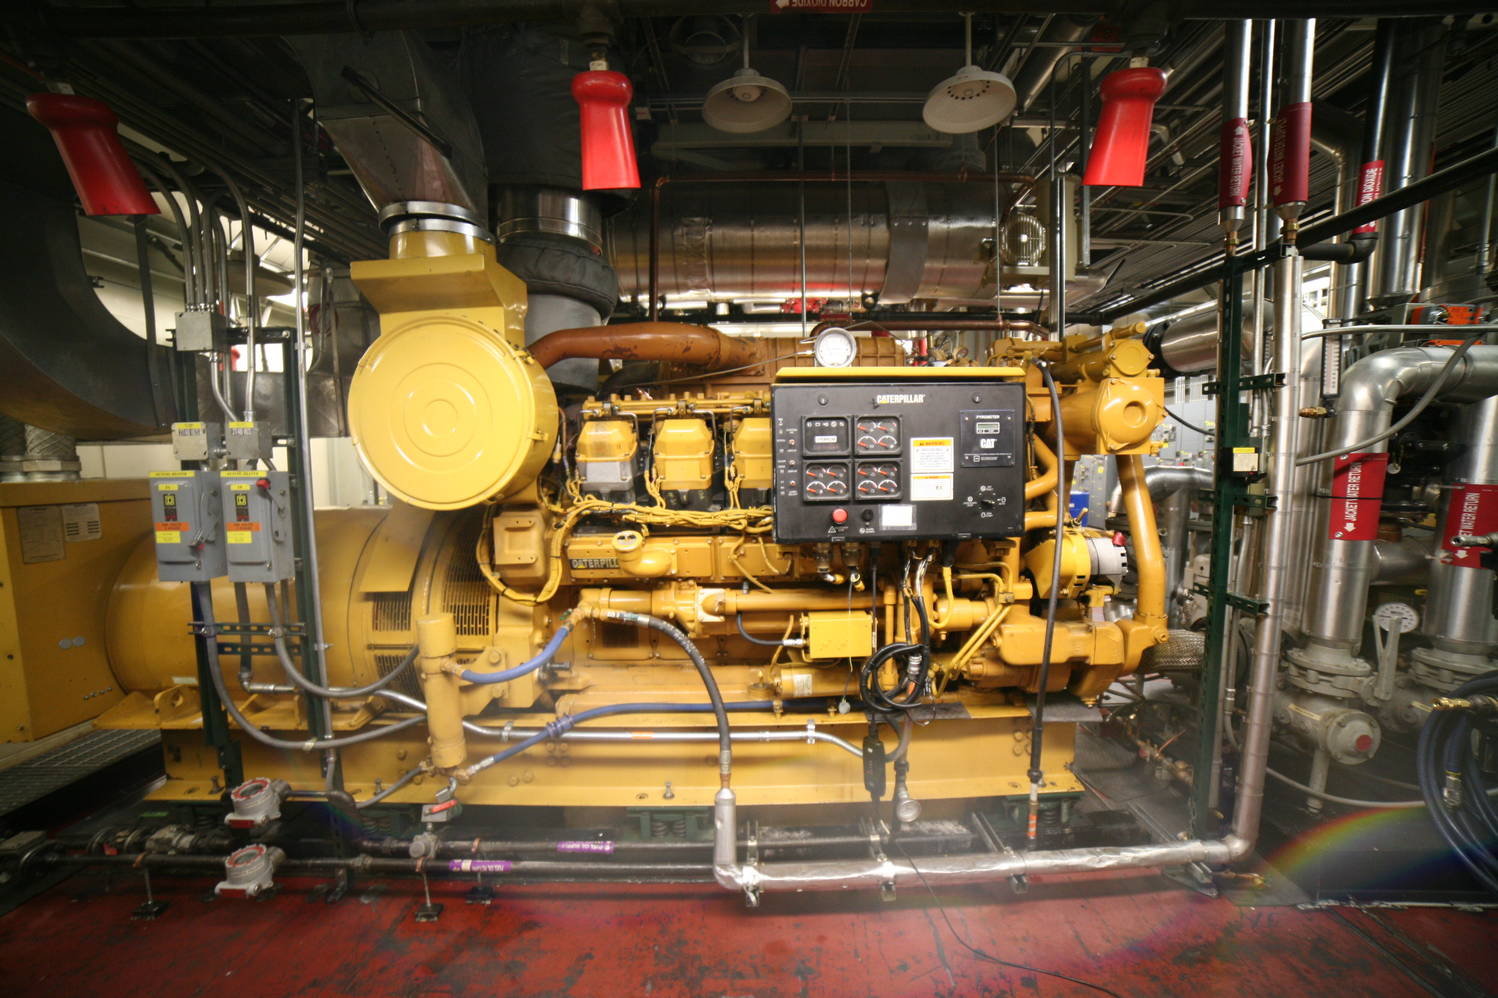 One of the power generators for heat and electricity